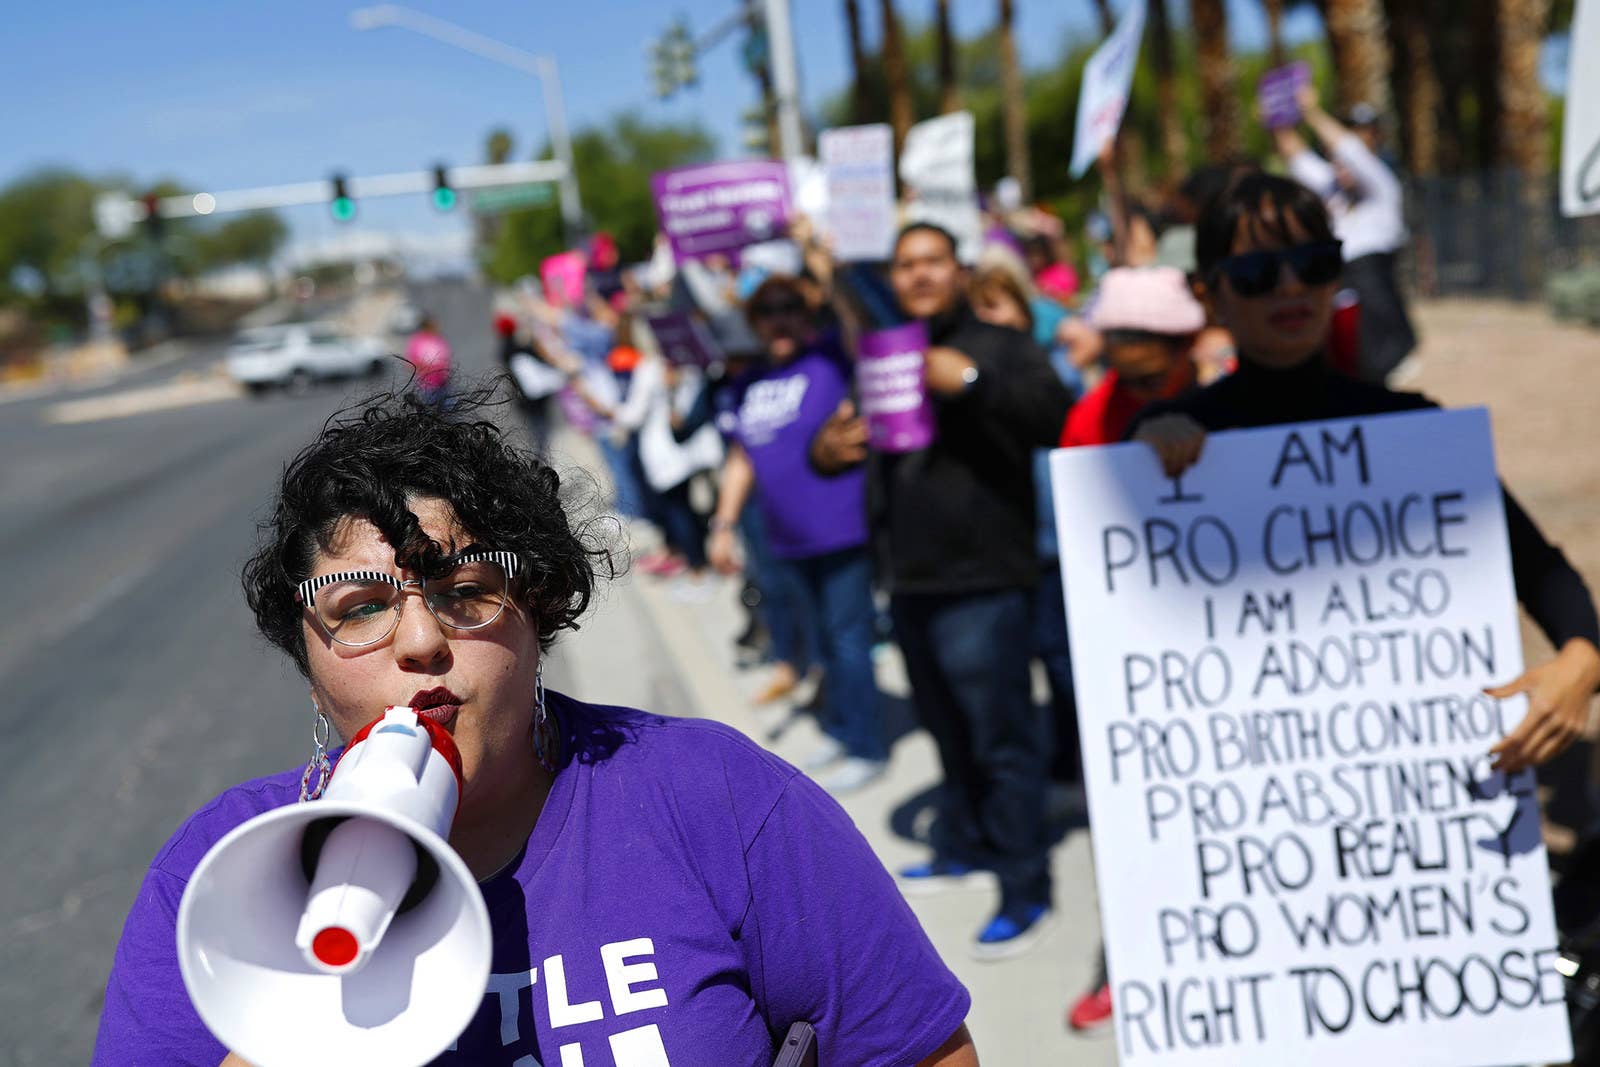 Karina Provost leads a chant during a rally in Las Vegas.